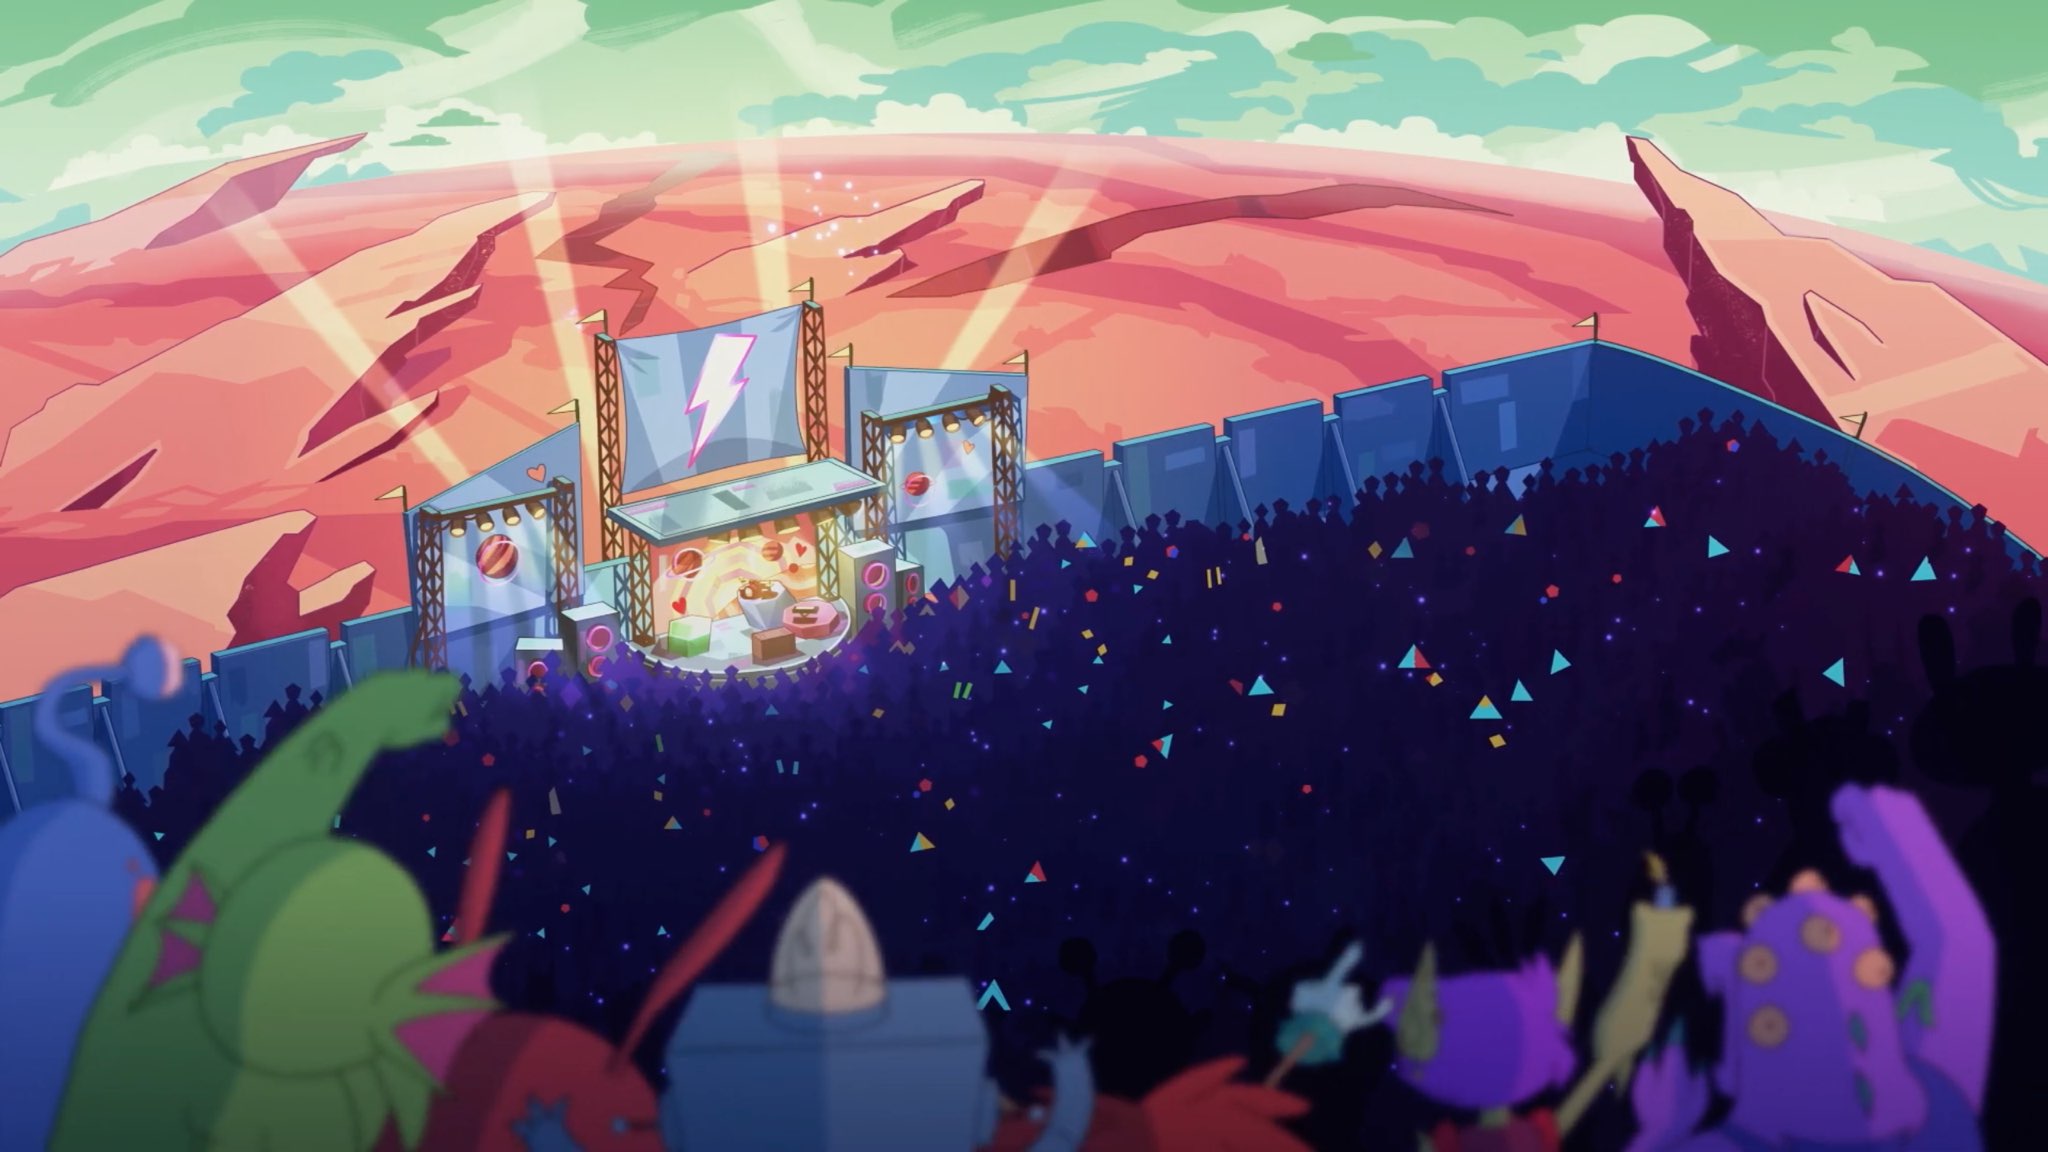 Be a space rock star in “Reigns: Beyond,” launching soon on Apple Arcade